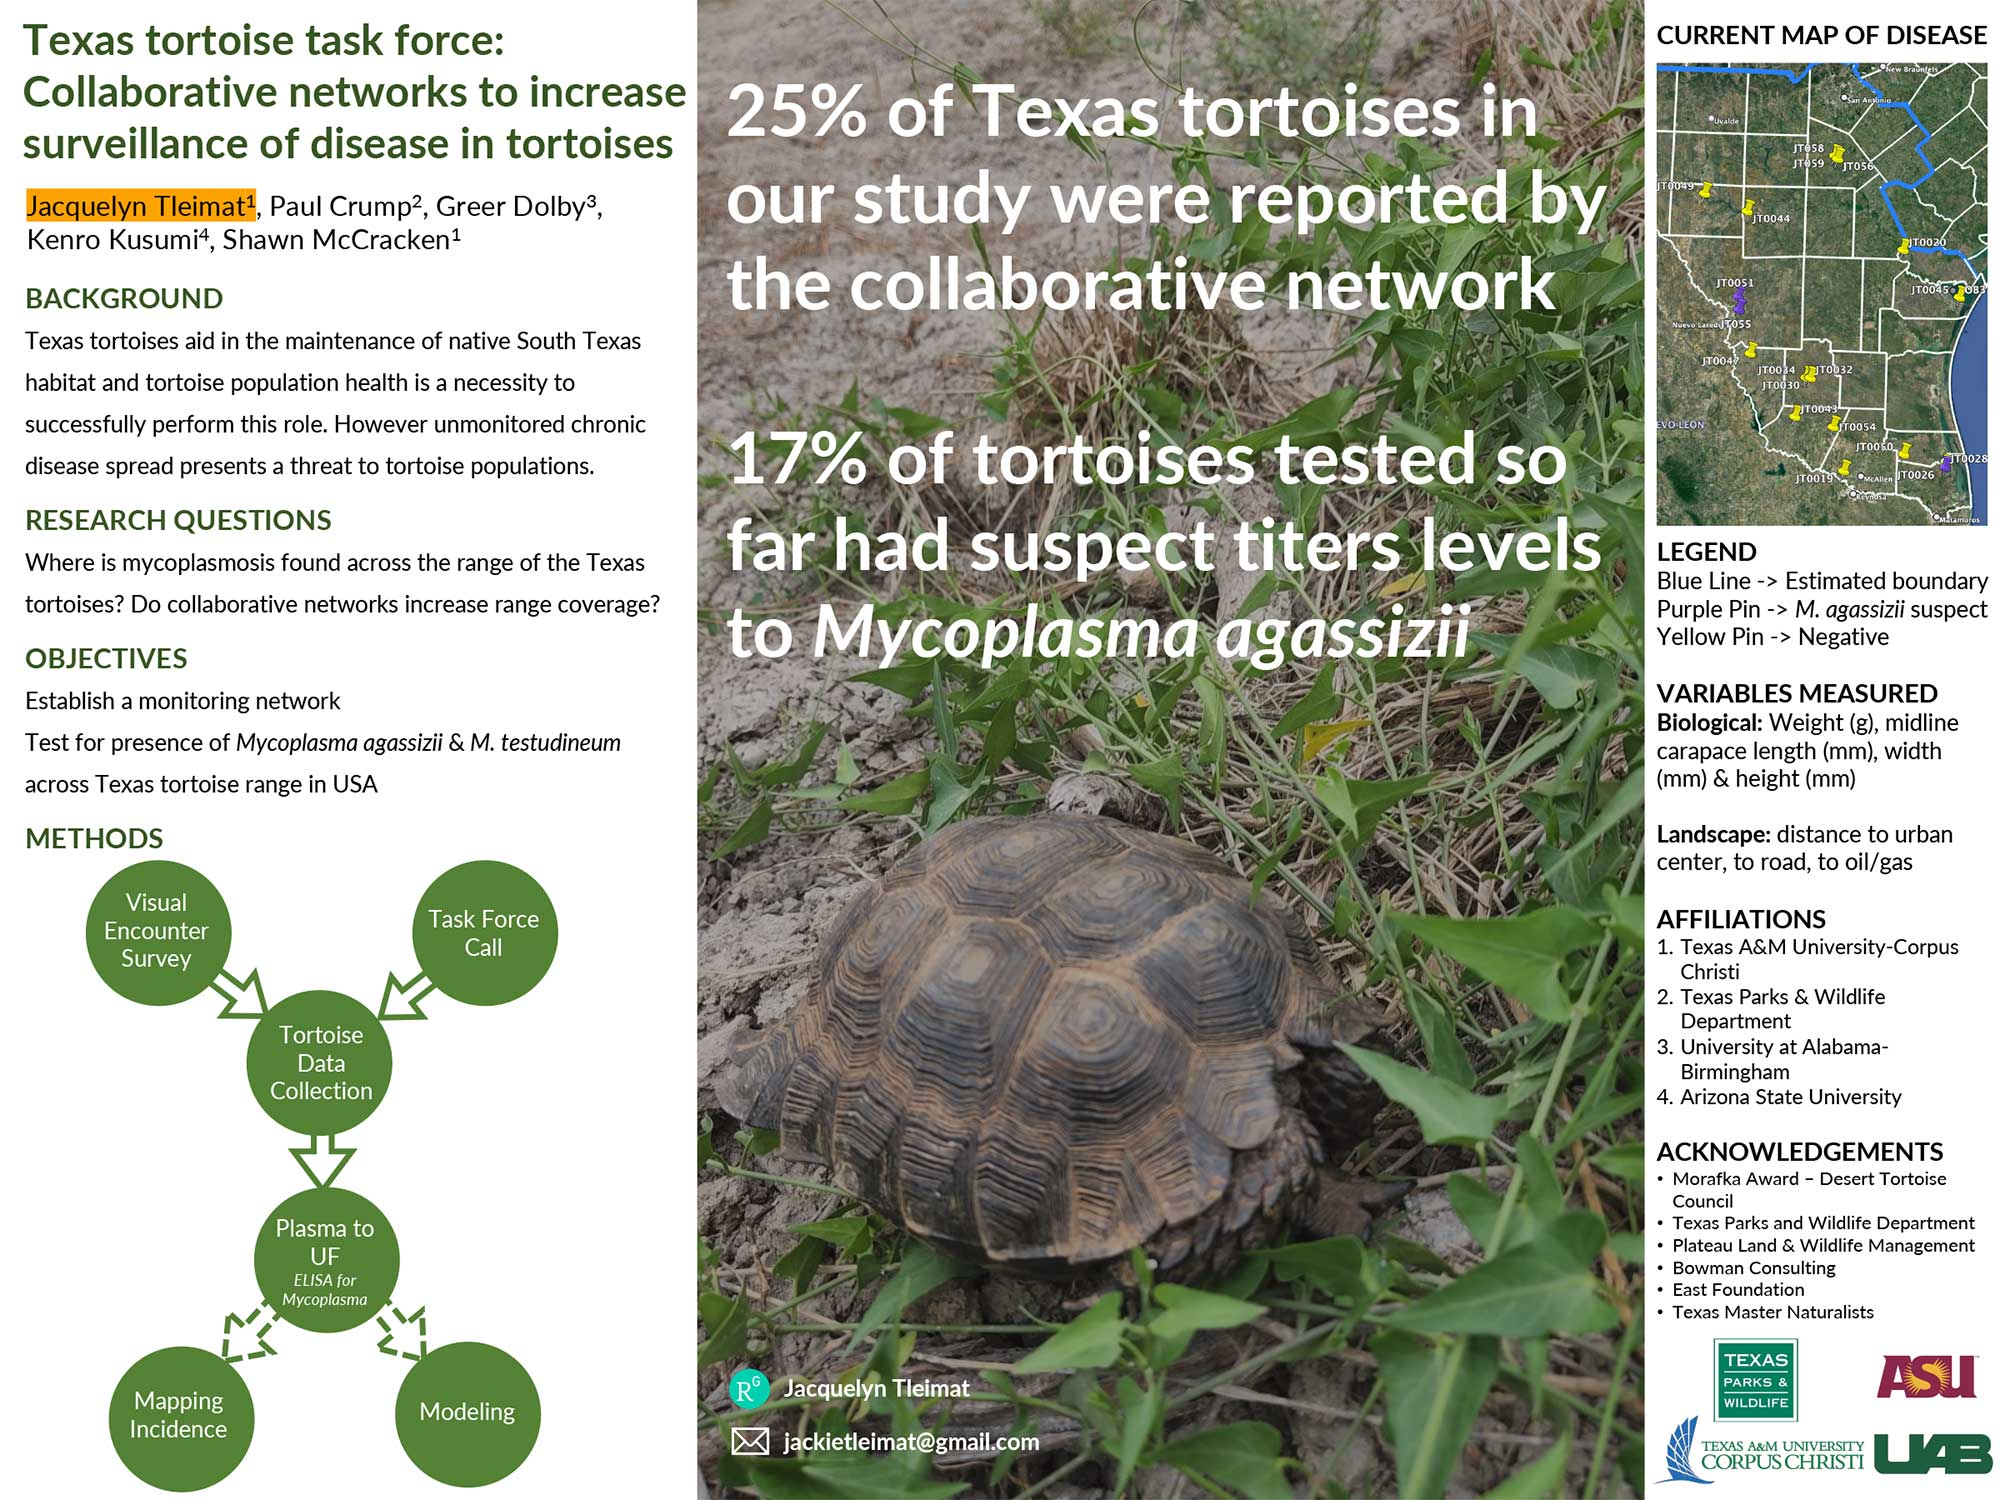 Poster: Texas tortoise task force: Collaborative networks to increase surveillance of disease in tortoises